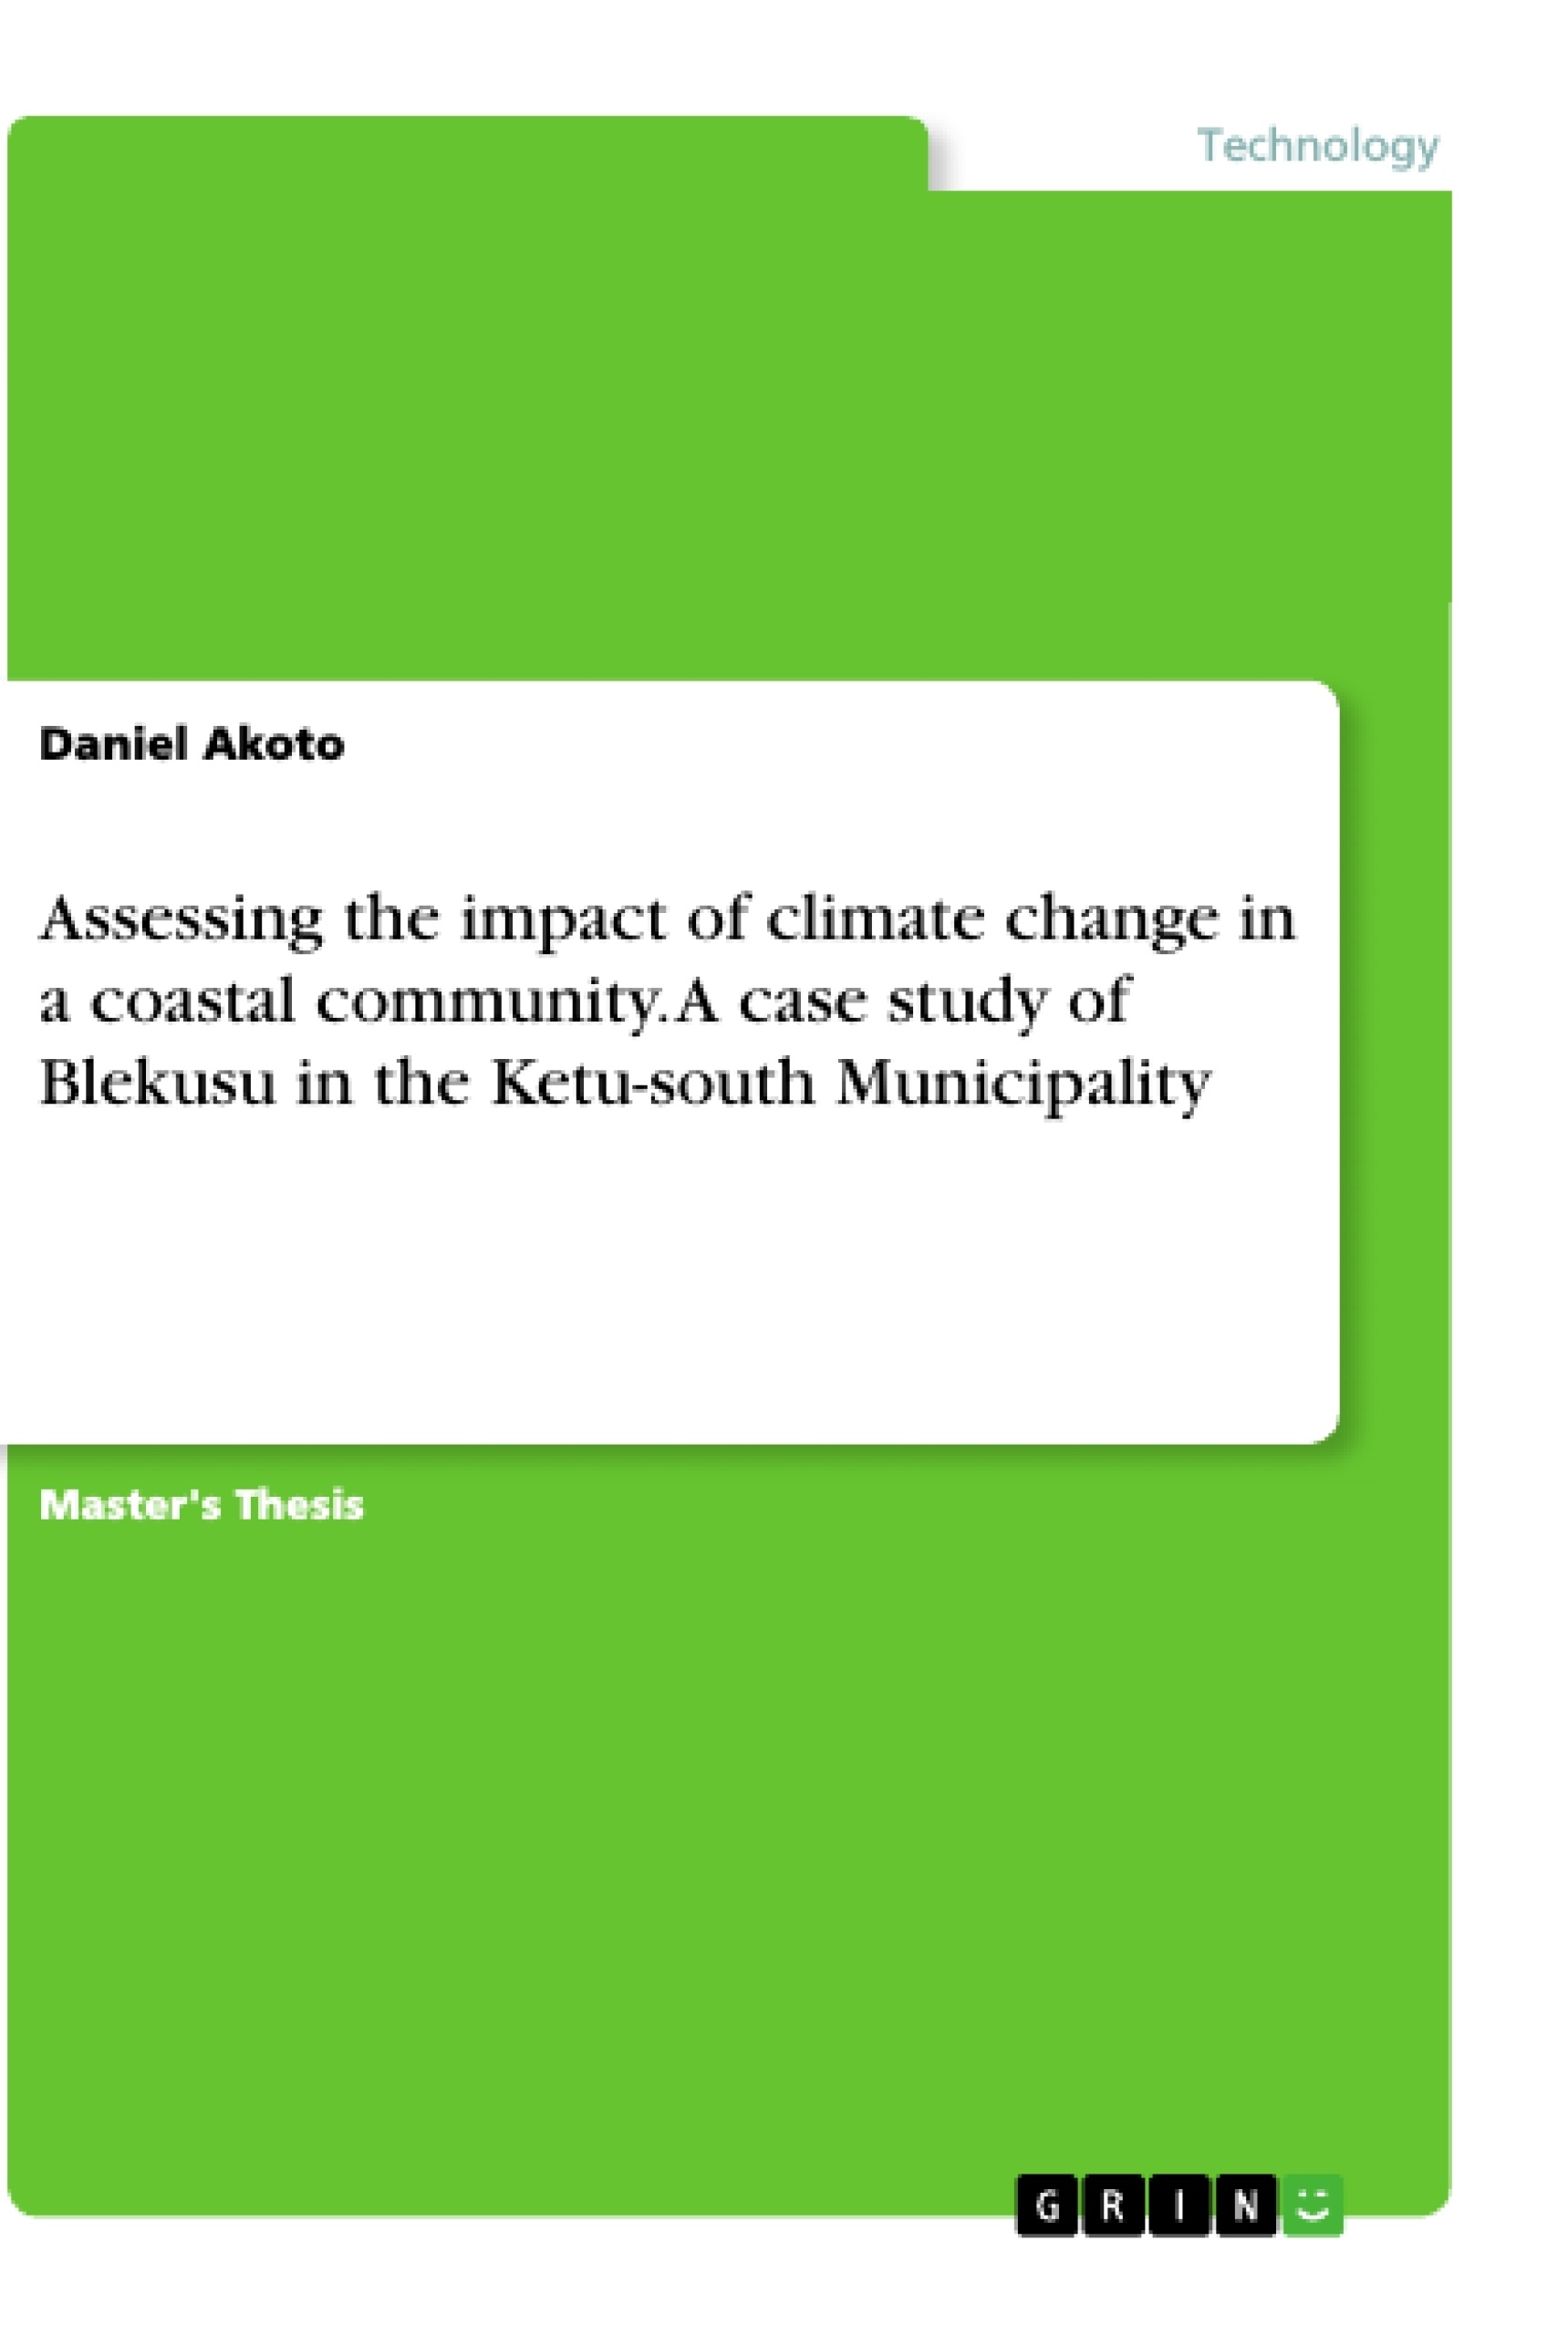 Título: Assessing the impact of climate change in a coastal community. A case study of Blekusu in the Ketu-south Municipality